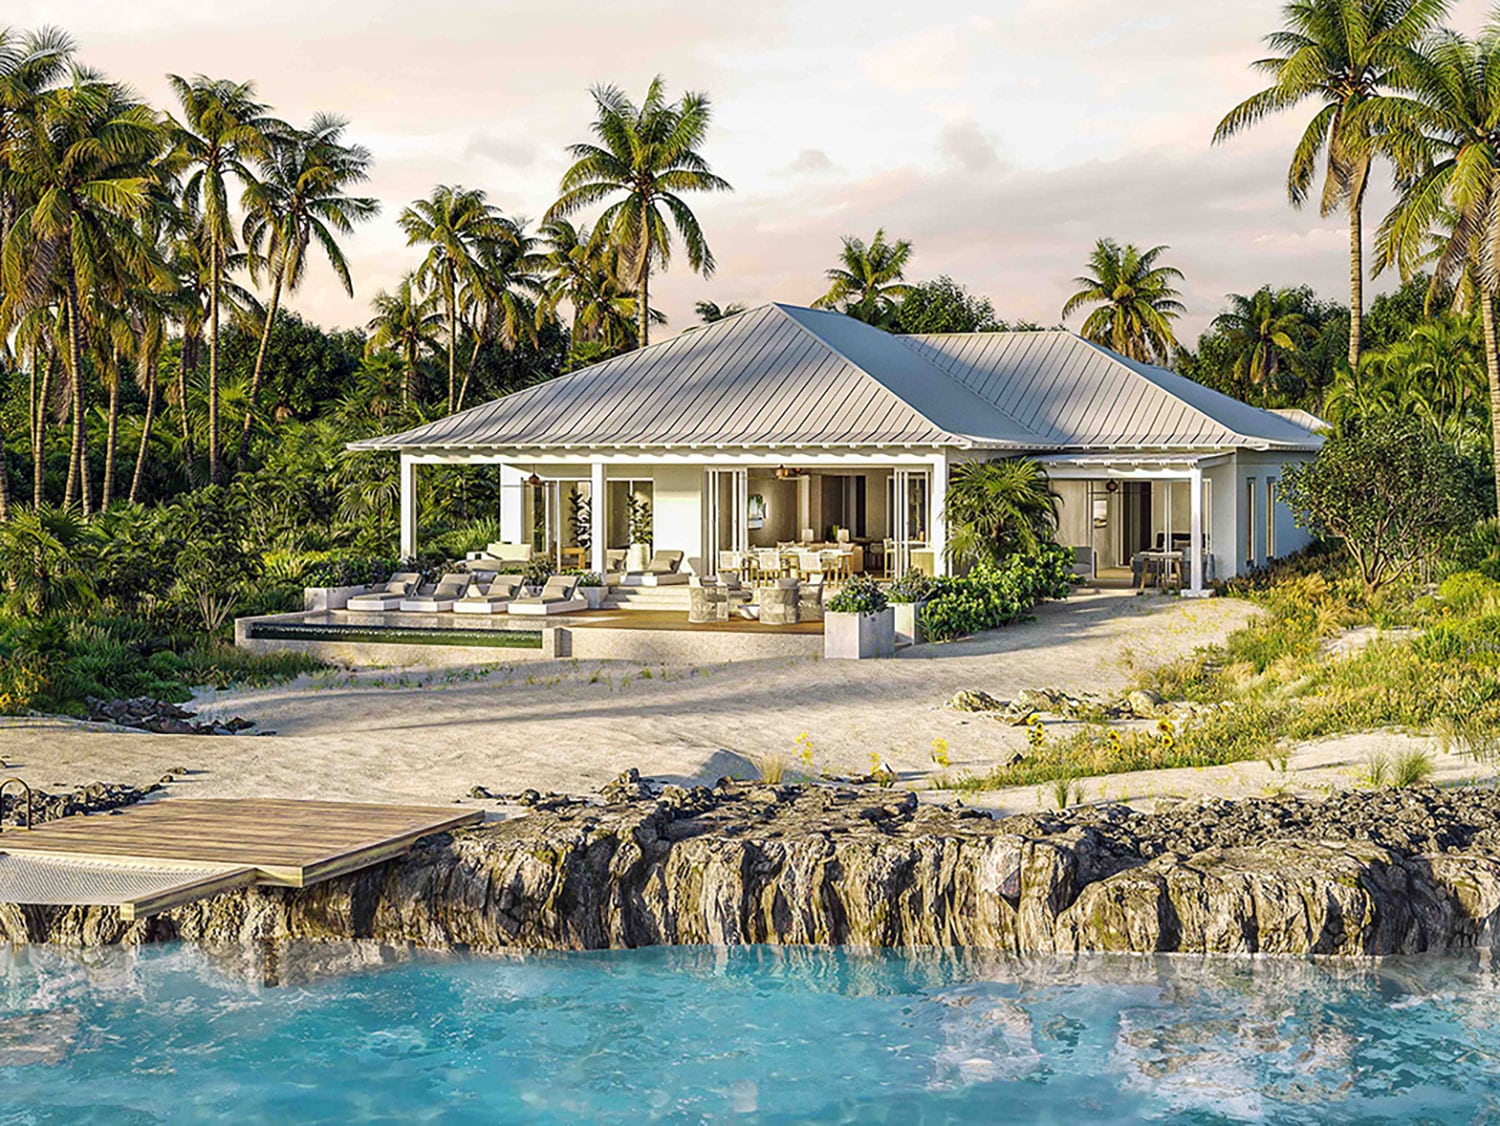 The rear view of Jasmine, a home in The Residences at Montage Cay, in the Abacos, Bahamas.